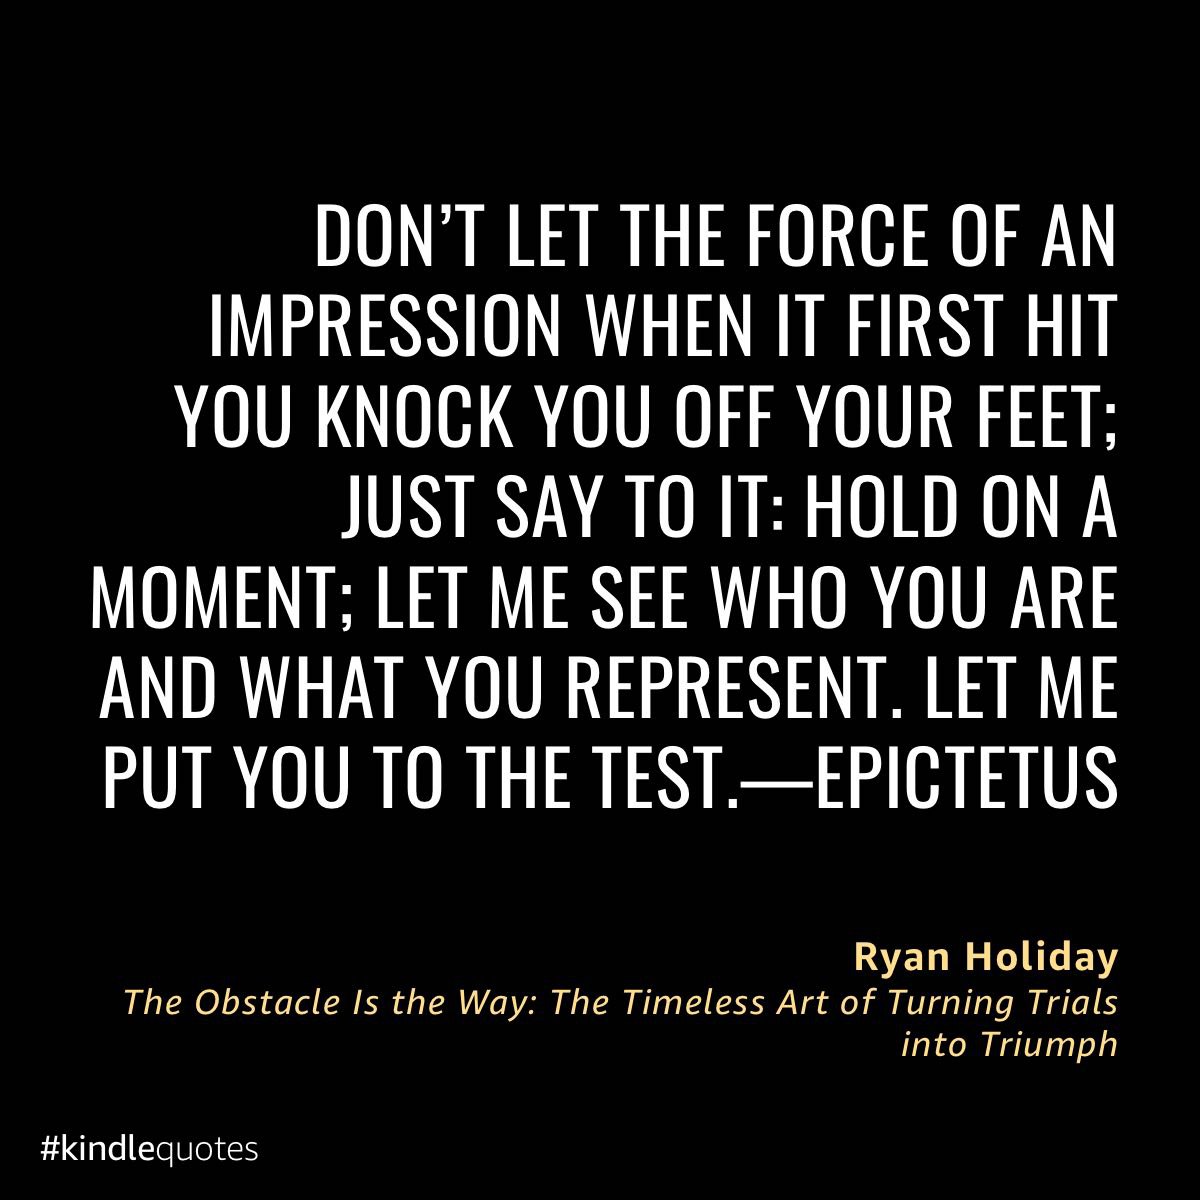 Quote from &ldquo;The Obstacle is the way&rdquo;